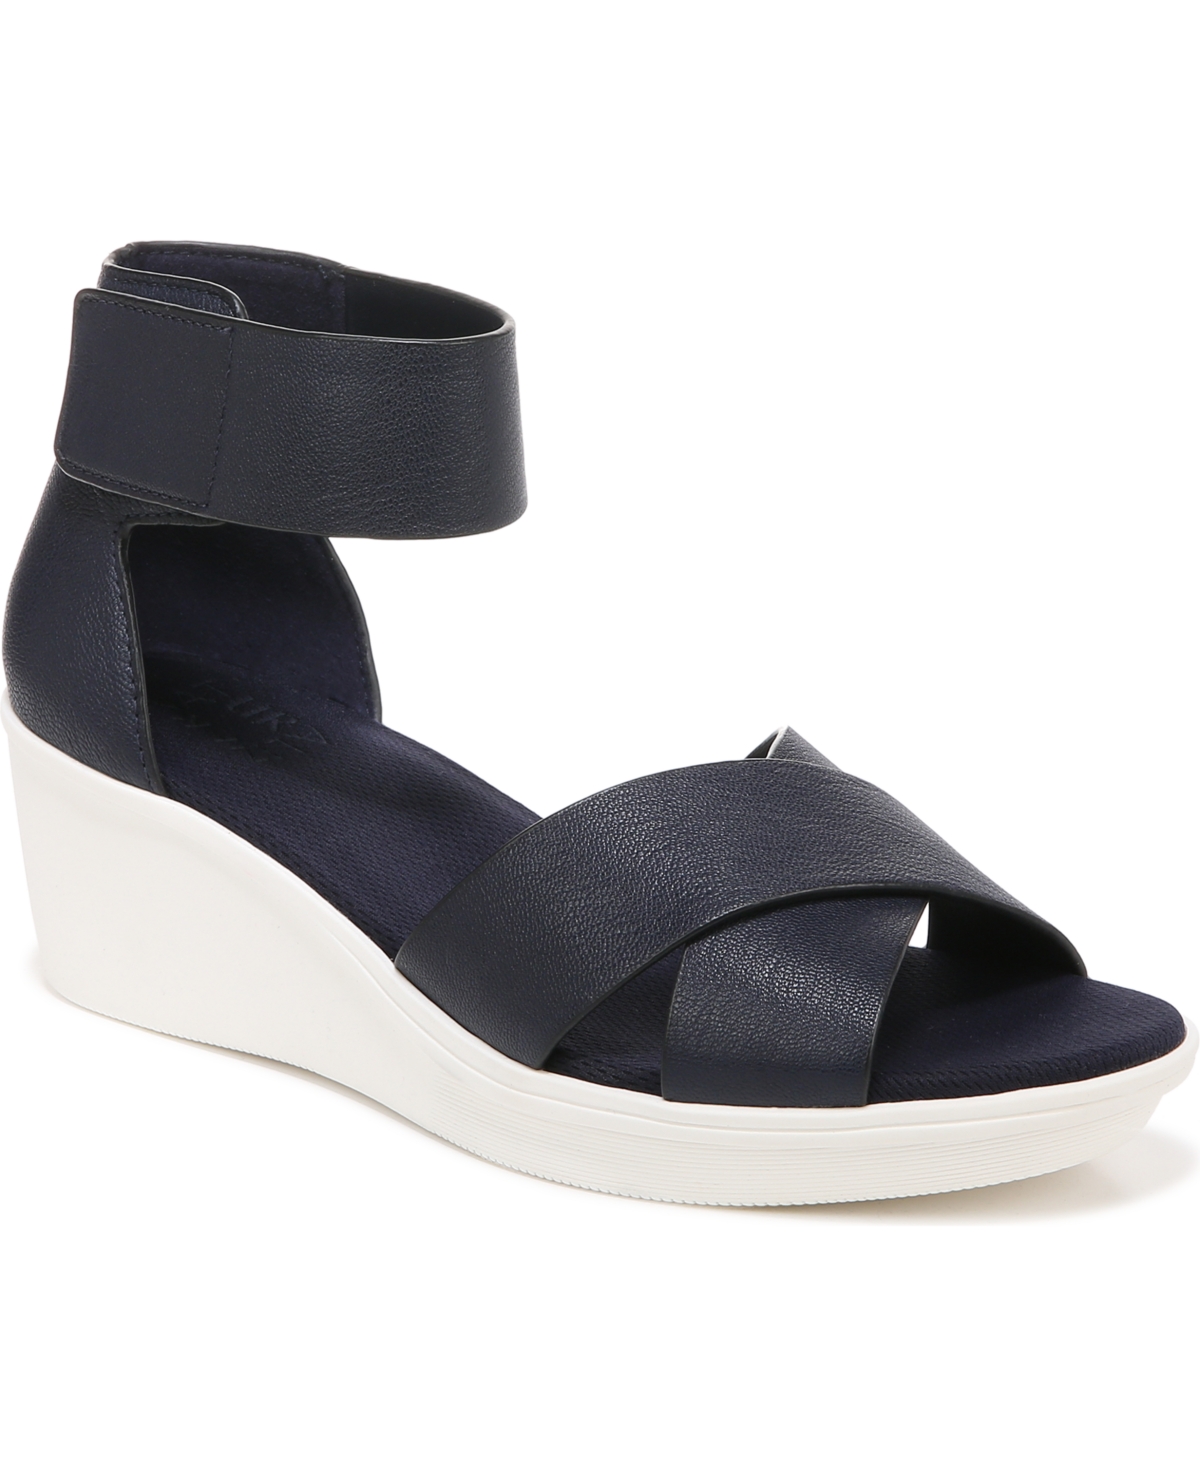 Riviera Ankle Strap Wedge Sandals - Black Leather